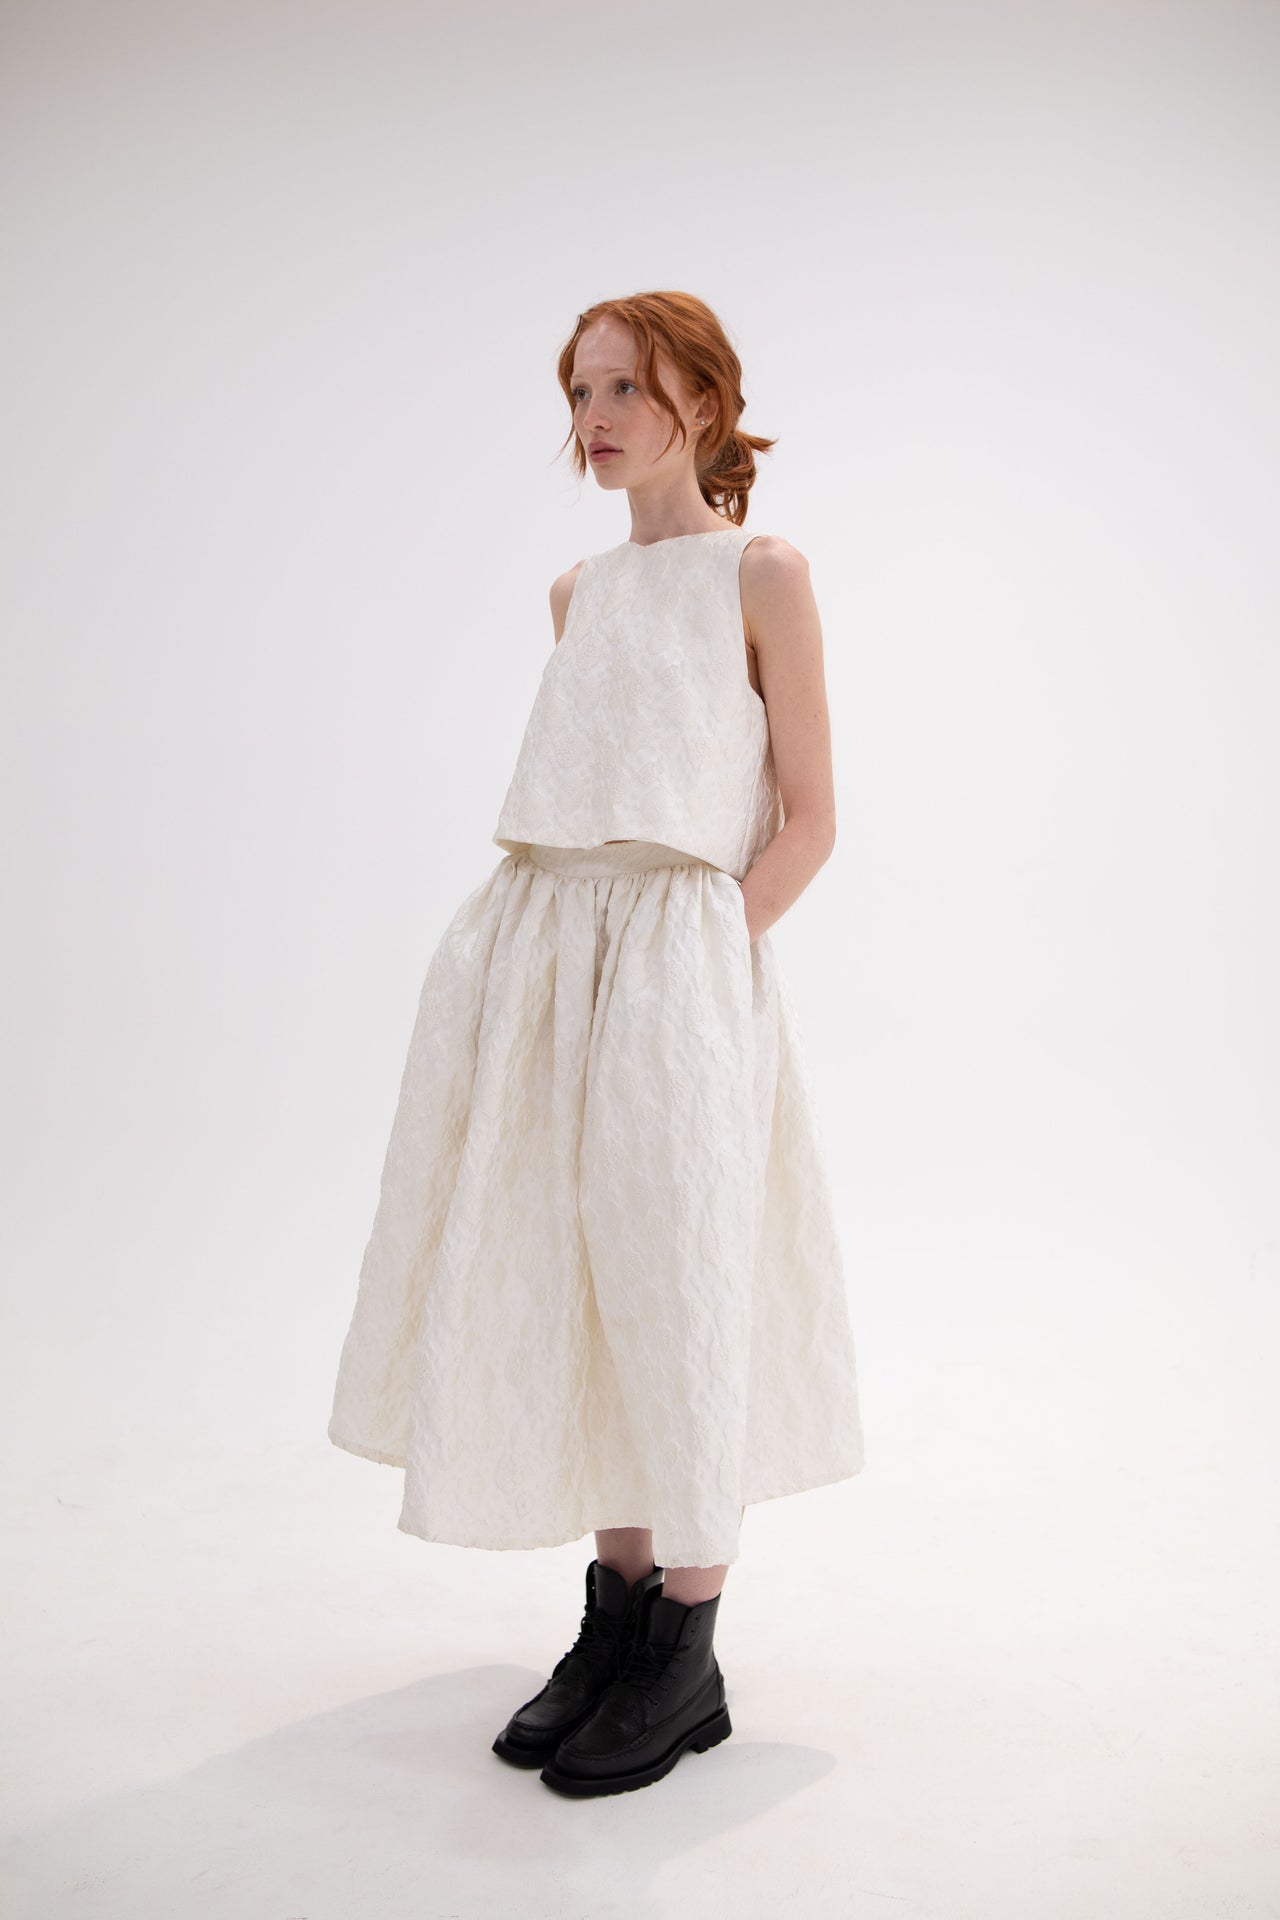 Monique white, two piece ensemble with hand tied bow and cloud details, romantic and sophisticated